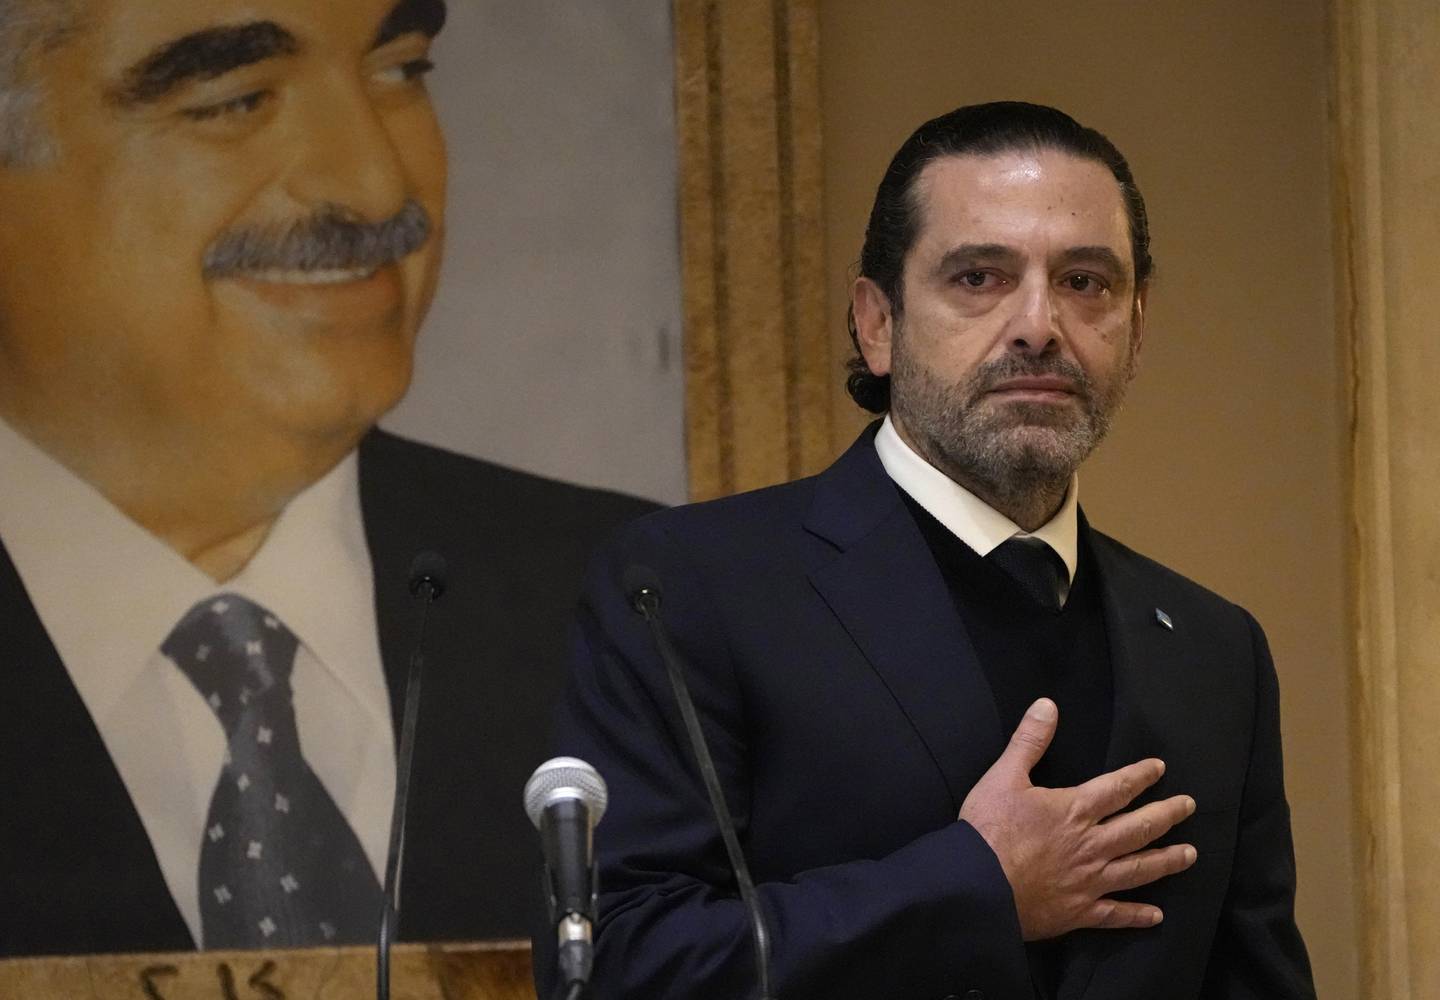 Former Lebanese Prime Minister Saad Hariri was visibly emotional as he announced he is suspending his work in politics and will not run in May's parliamentary elections. AP